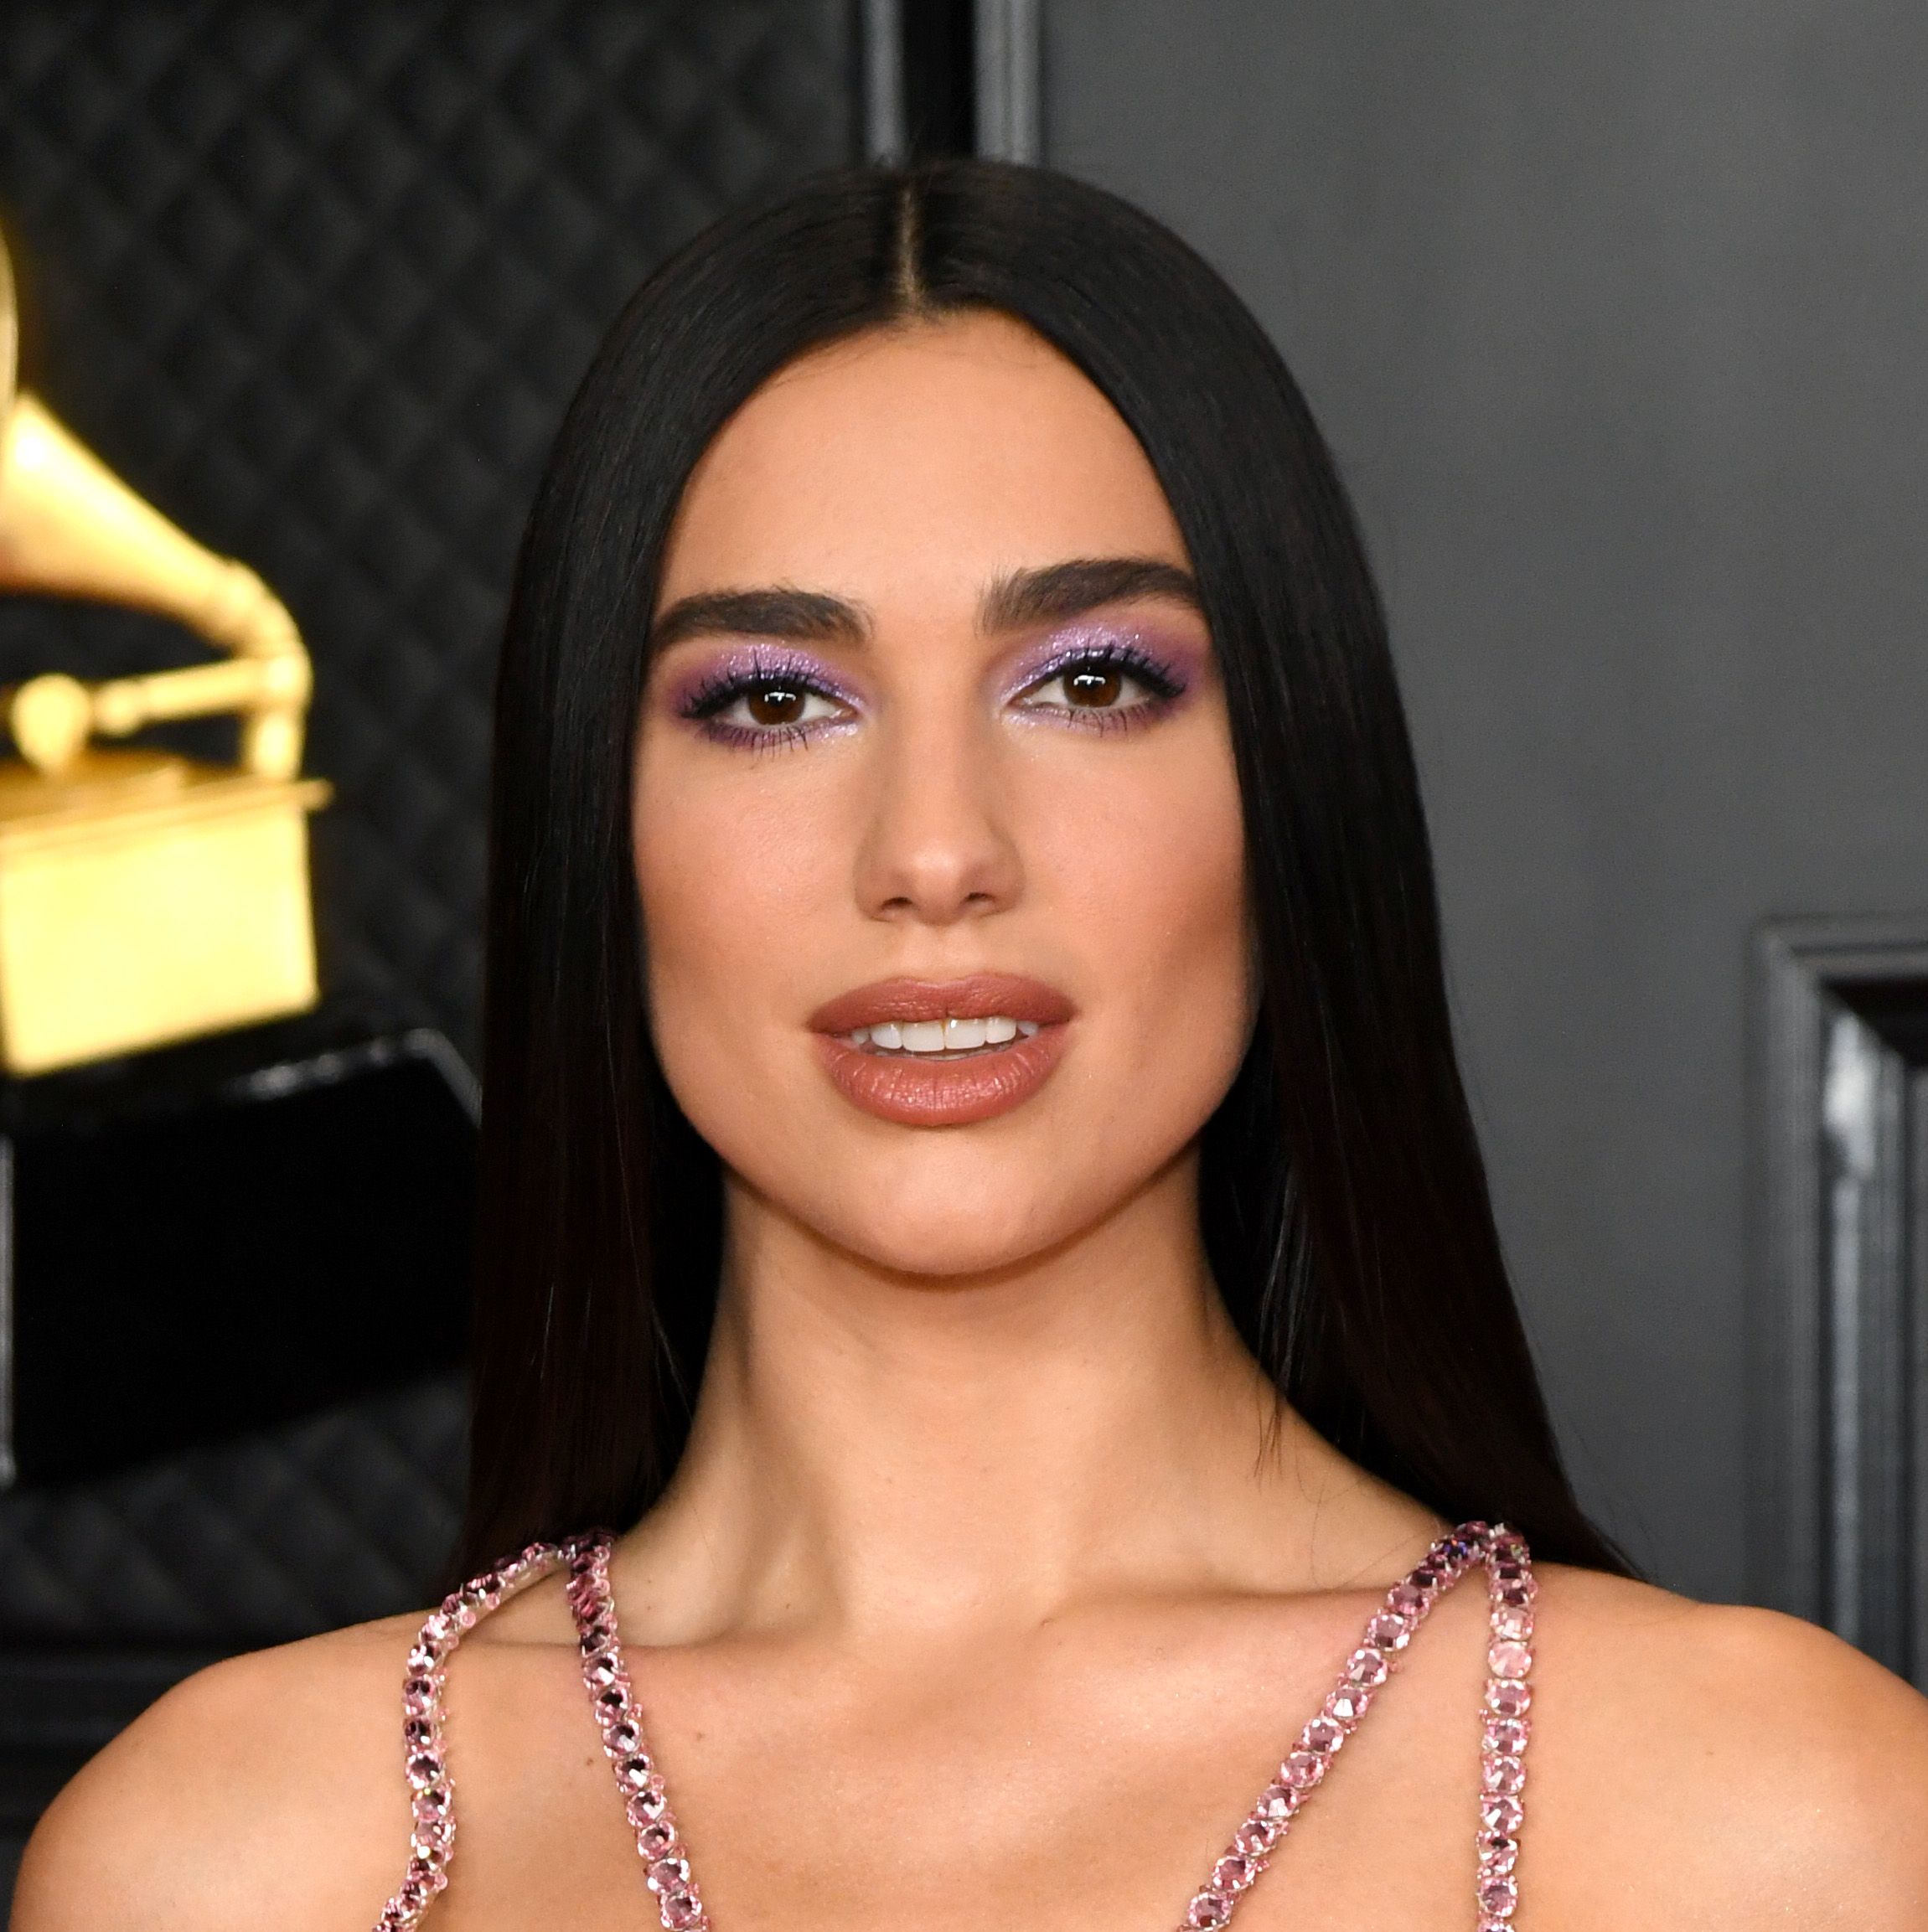 Dua Lipa Proves She Can Pull Off Anything with This Outfit Change